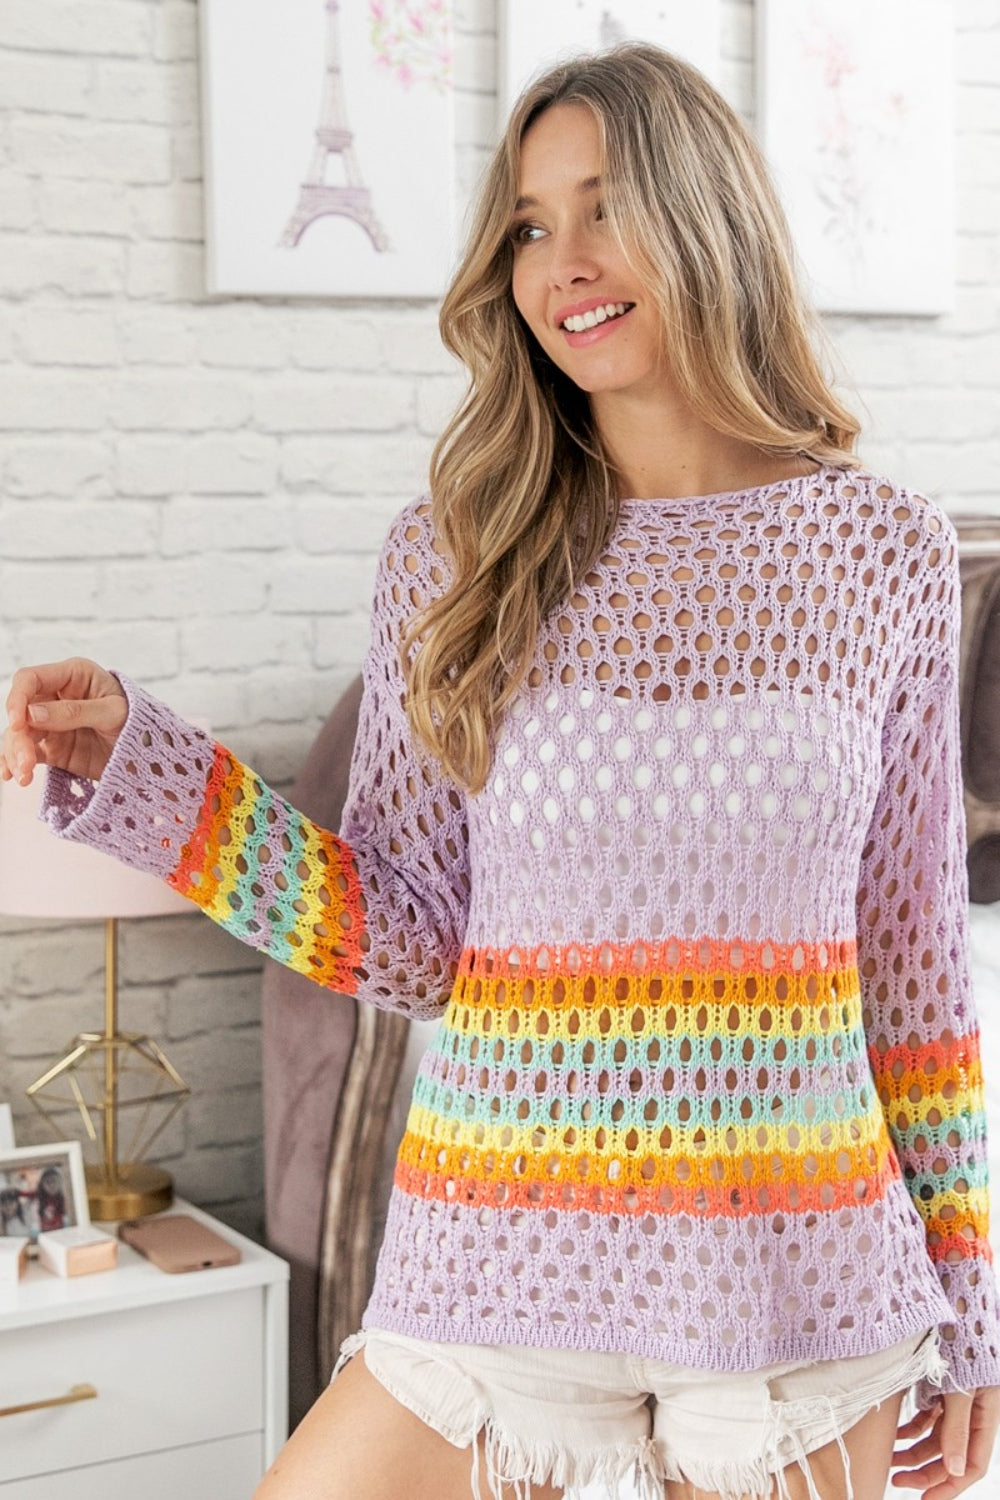 BiBi Relaxed Fit Long Sleeves Rainbow Stripe Hollow Out Cover Up Top